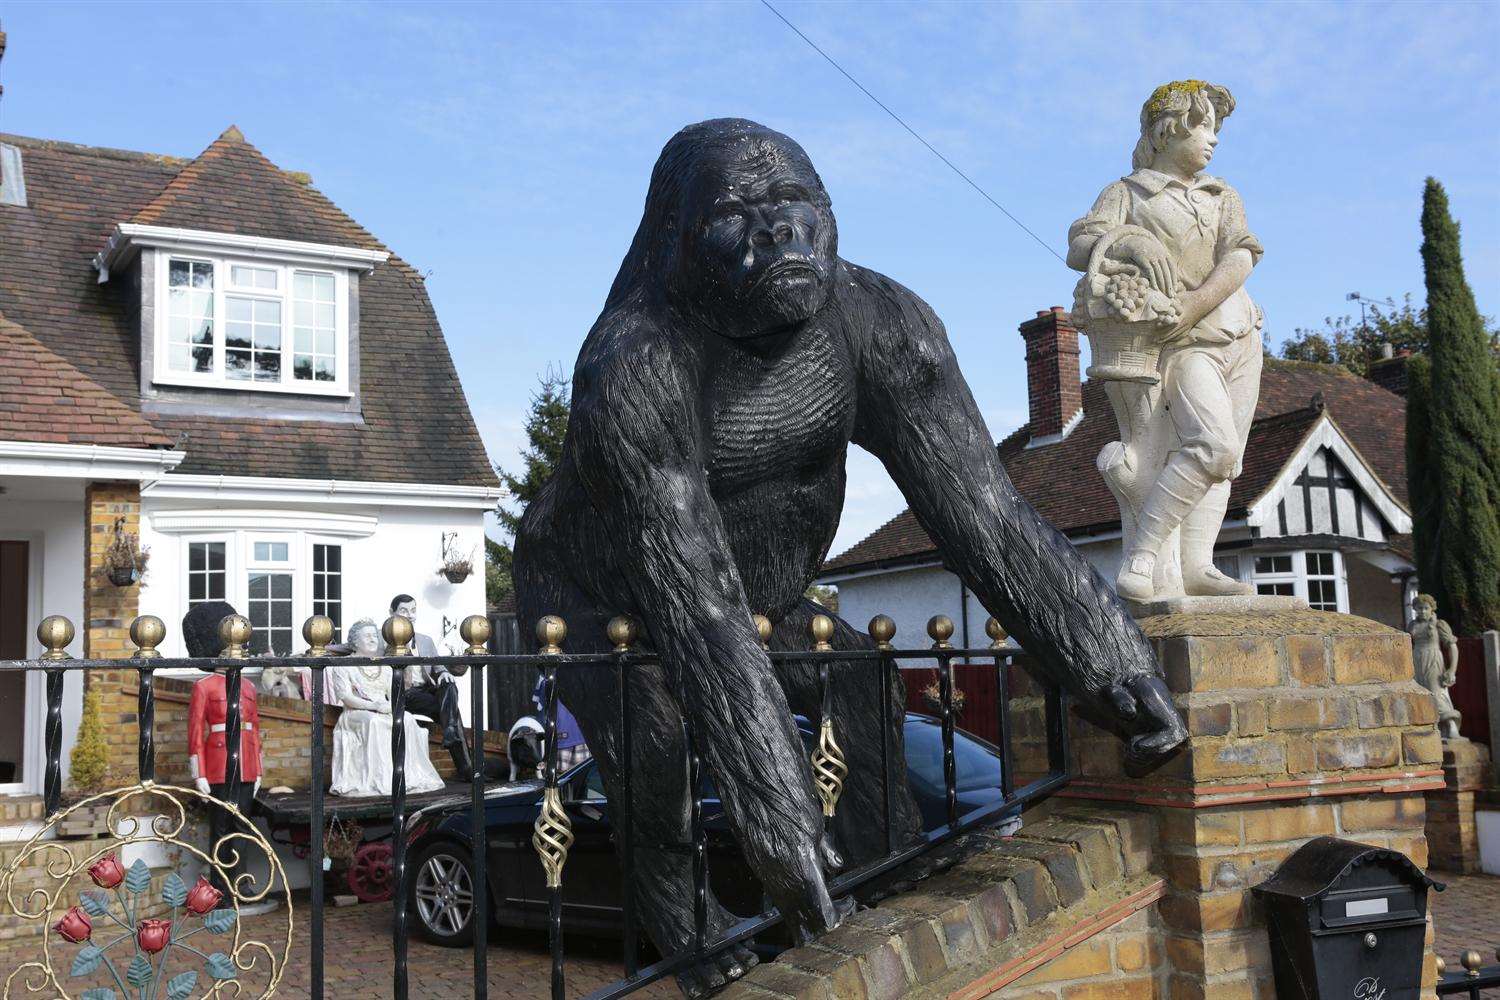 A gorilla greets you at the gate of Tony Cook's home in Lenham